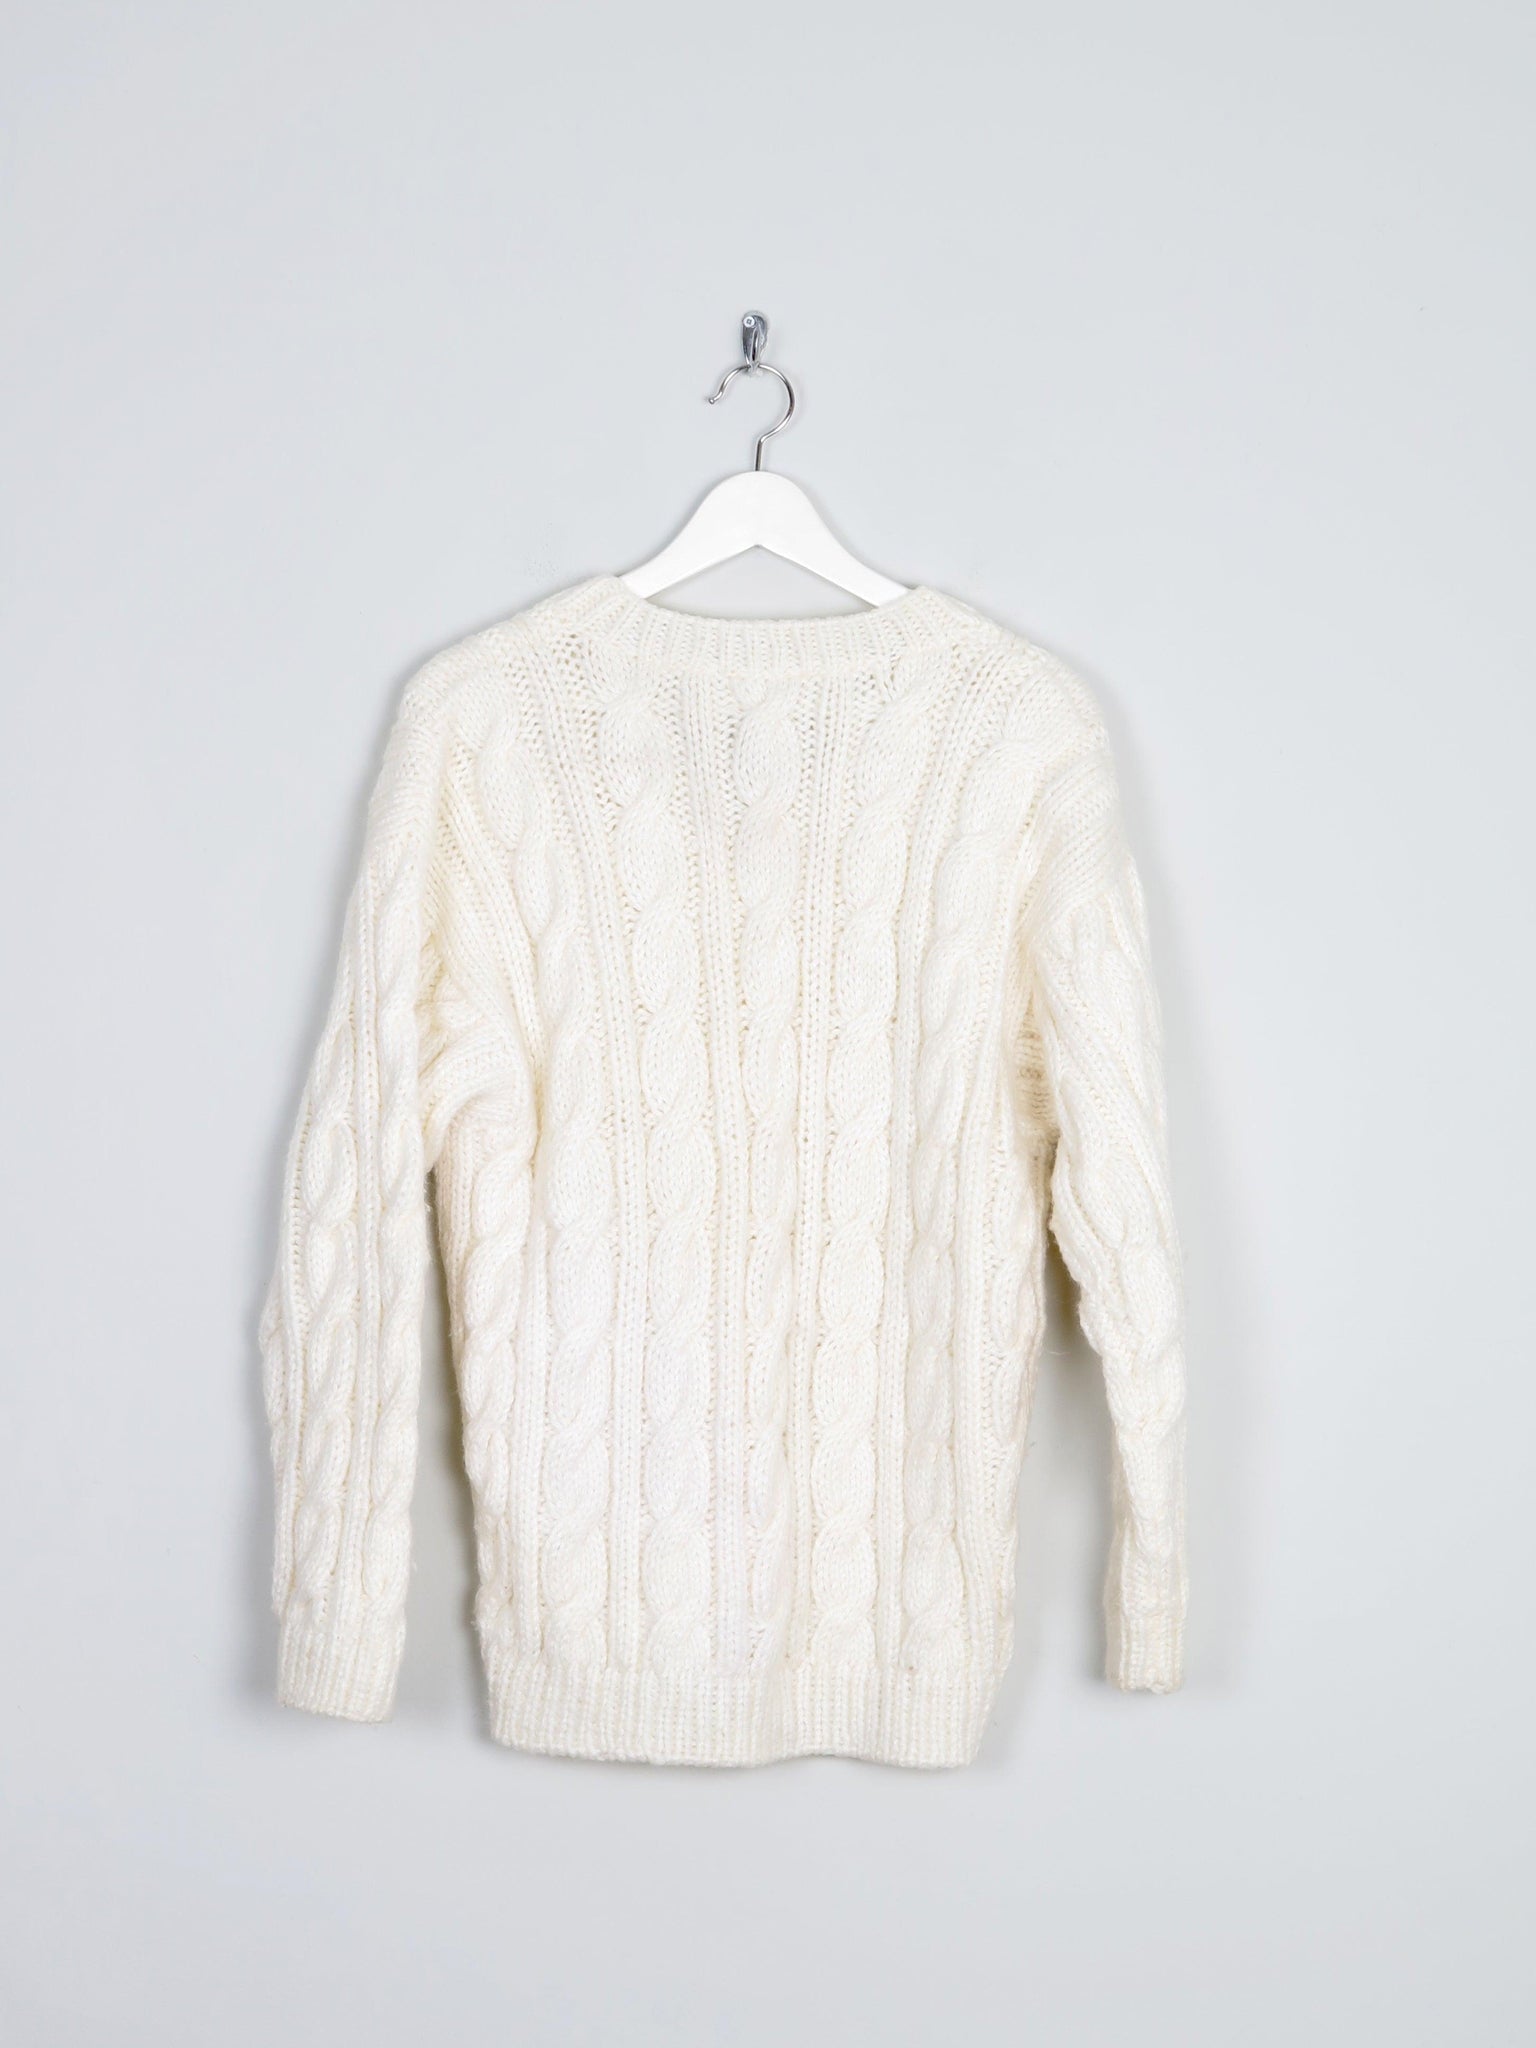 Cream Unisex Hand-knit V-neck Jumper With Cable Knit S/M - The Harlequin